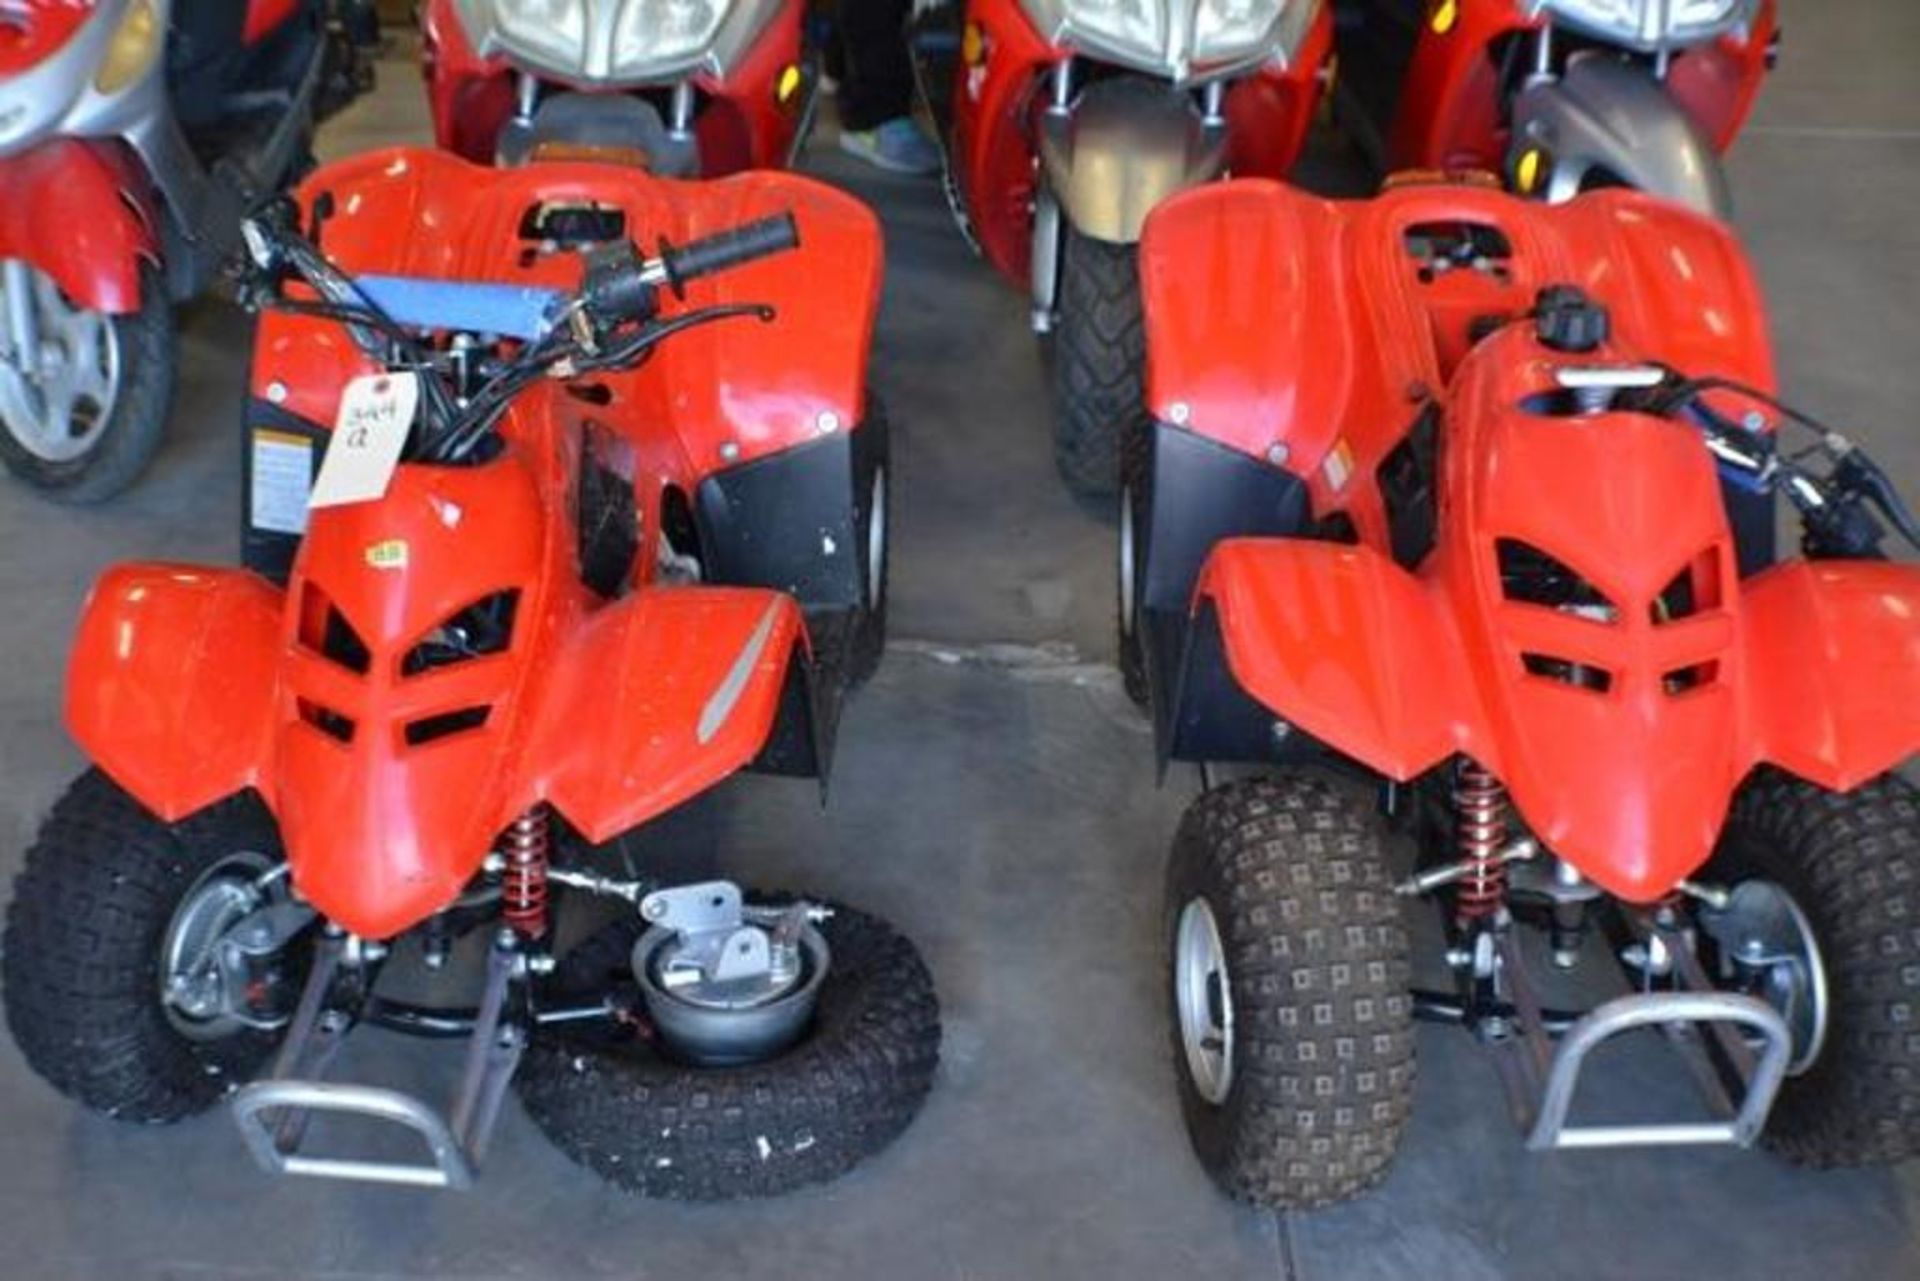 ATV 50cc 4 Stroke Red Color for Parts or Repair. Qty 2 One lot